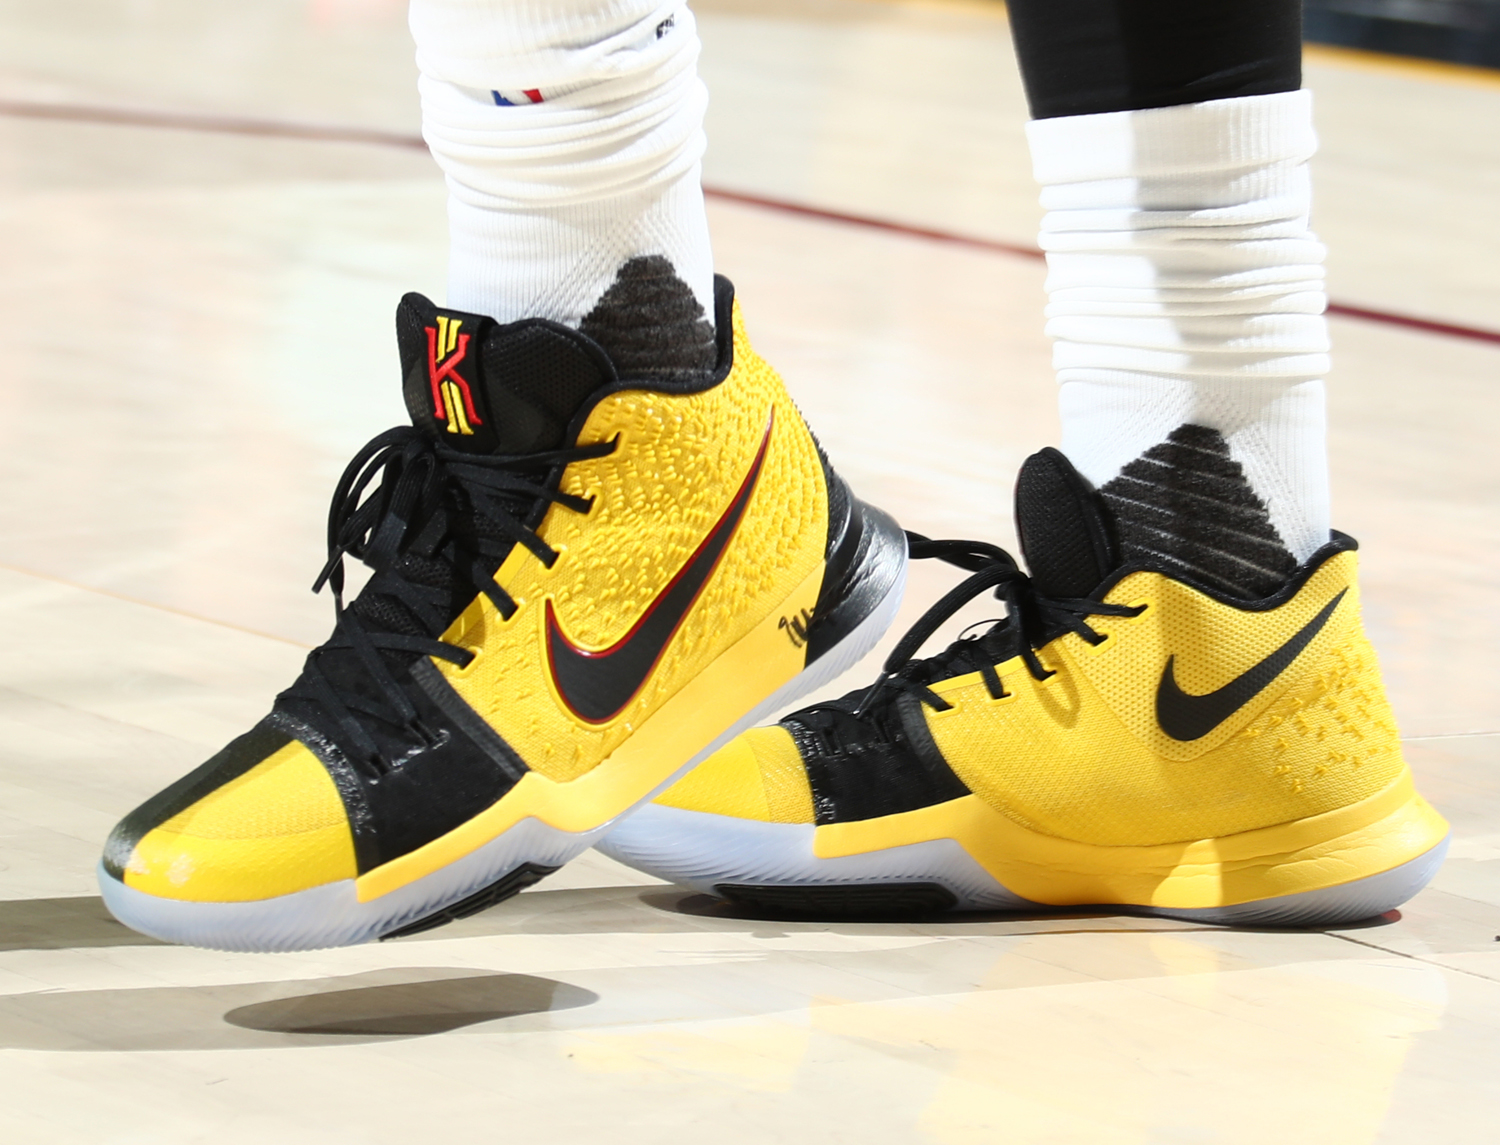 kyrie 3 bruce lee for sale